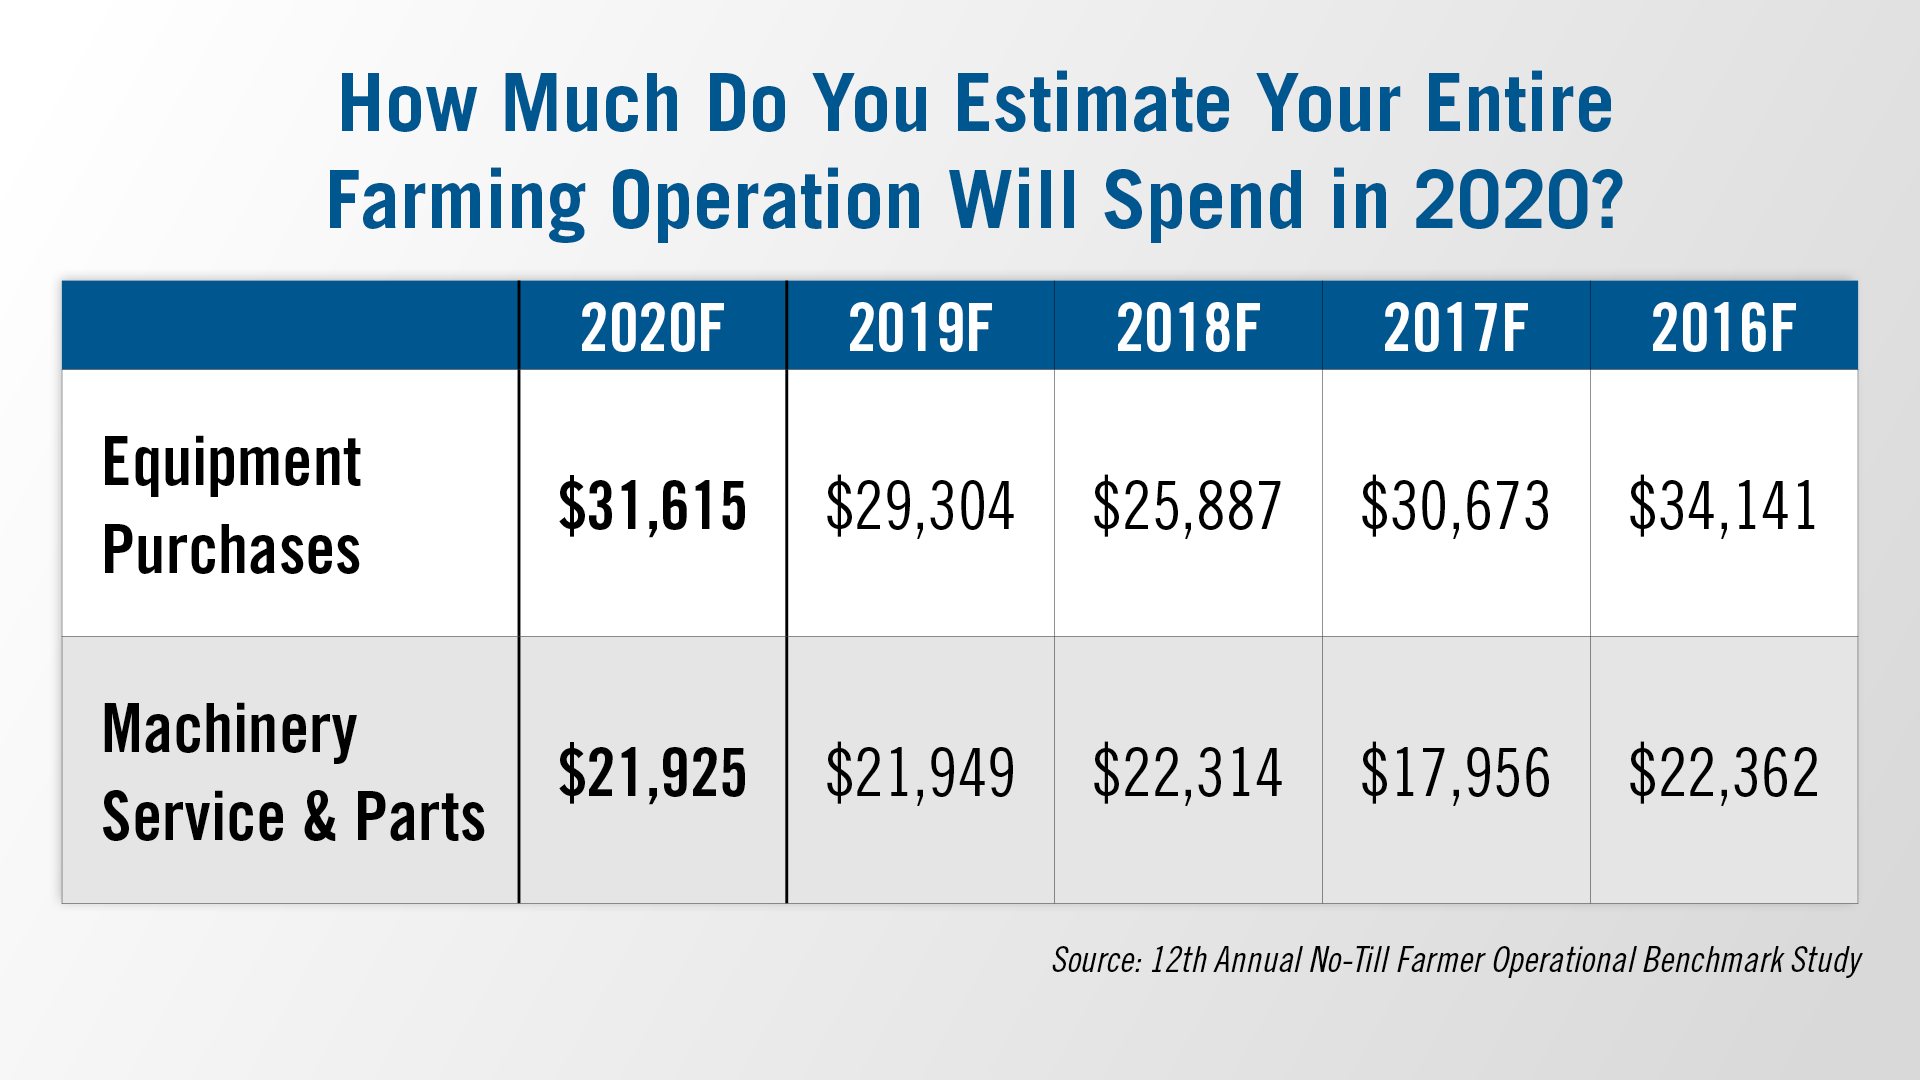 How Much do You Estimate Your Entire Farming Operation Will Spend in 2020?